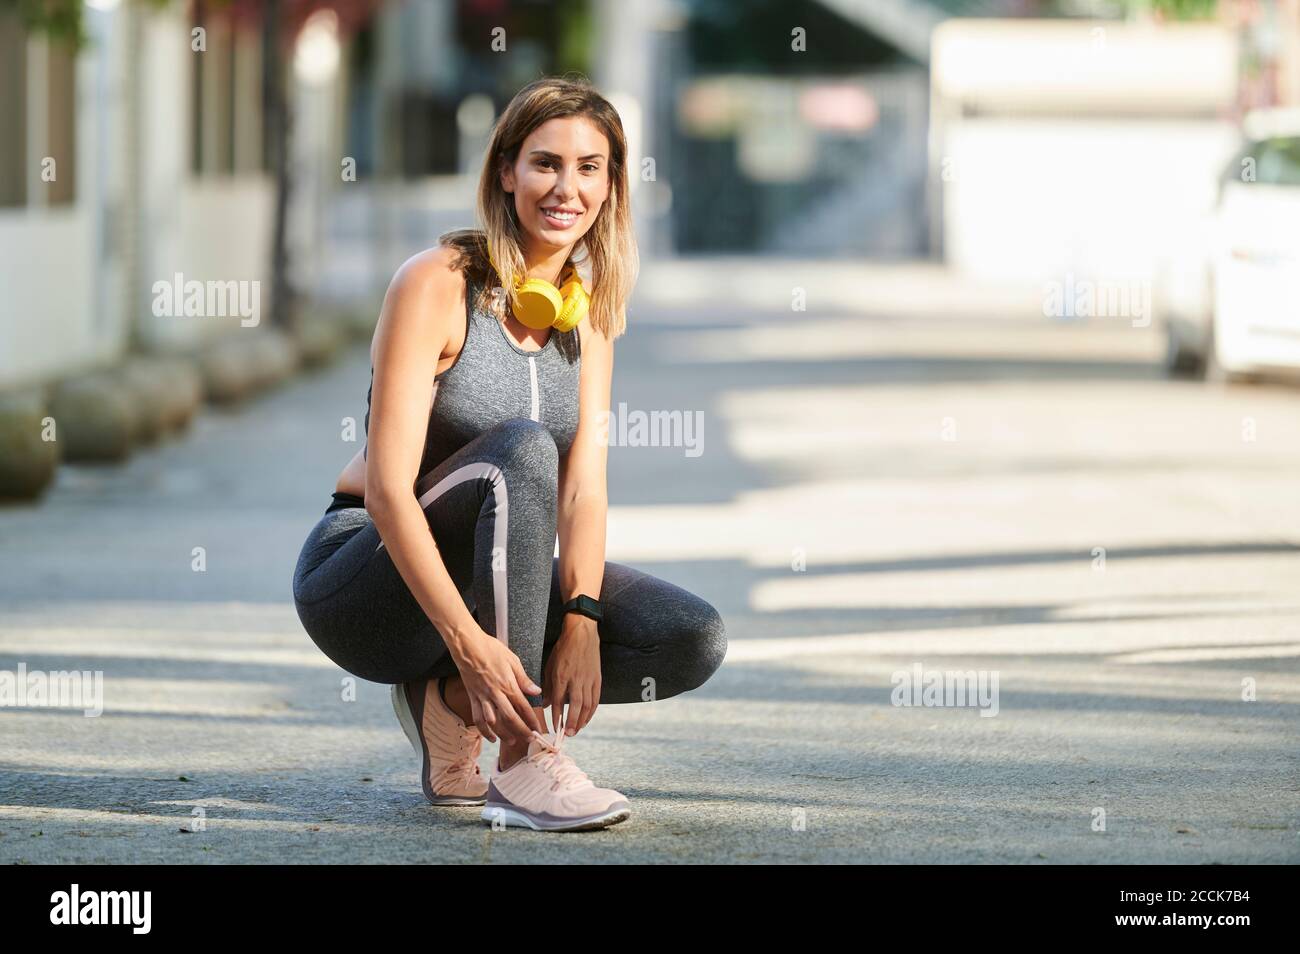 Smiling woman with headphones tying shoelace at sidewalk Stock Photo